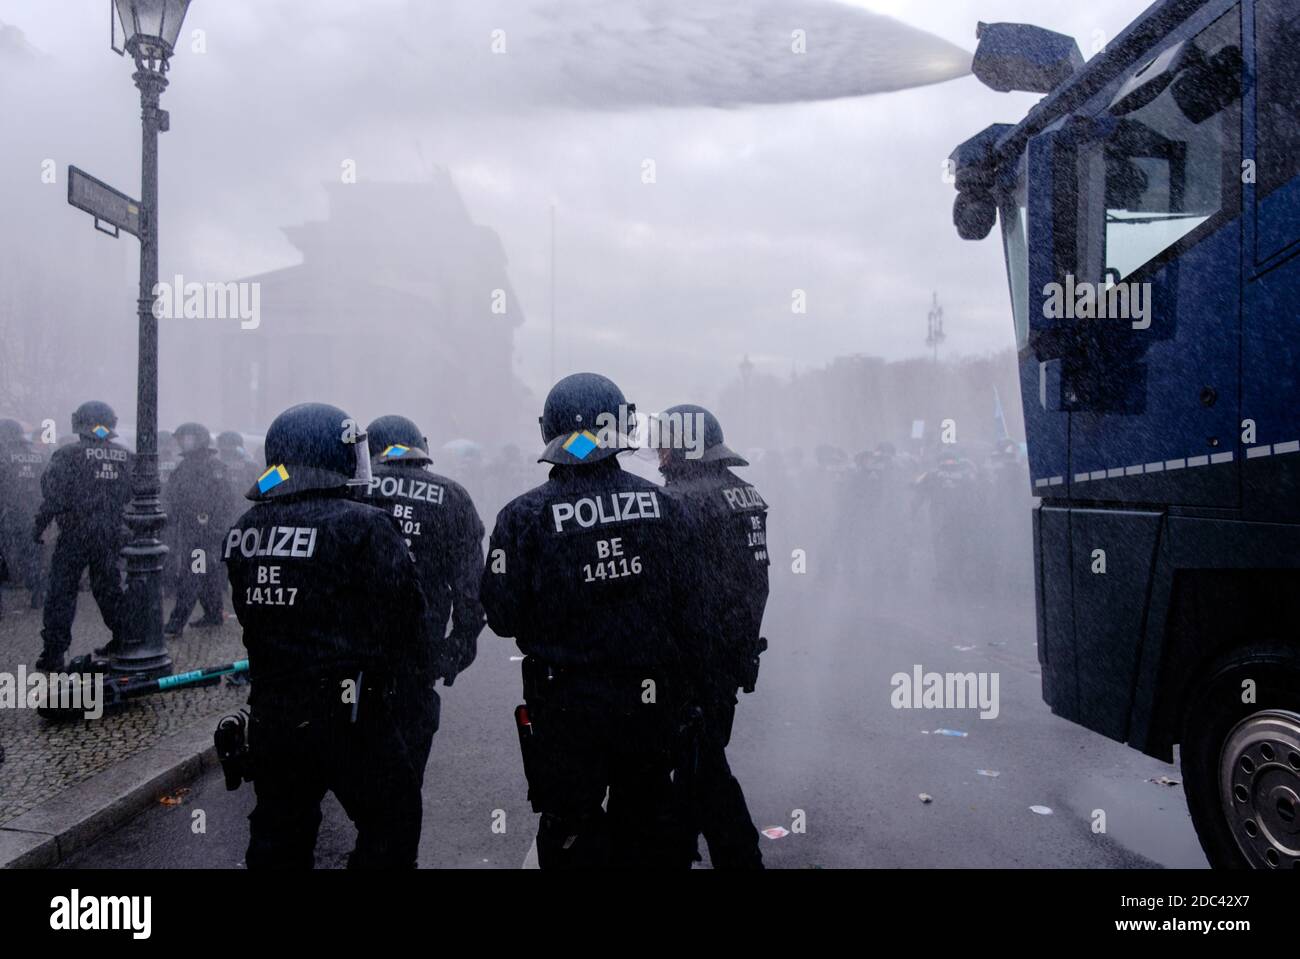 Berlin, Germany. 18th Nov, 2020. Germany, Berlin, November 18, 2020: Police can be seen during the use of water cannons after heterogeneous groups around Corona deniers, conspiracy theorists and right-wing extremists called for blocking access to German Government Buildings. Both the Bundestag and the Bundesrat vote on planned new regulations of the infection protection law on November 18, 2020. (Photo by Jan Scheunert/Sipa USA) Credit: Sipa USA/Alamy Live News Stock Photo